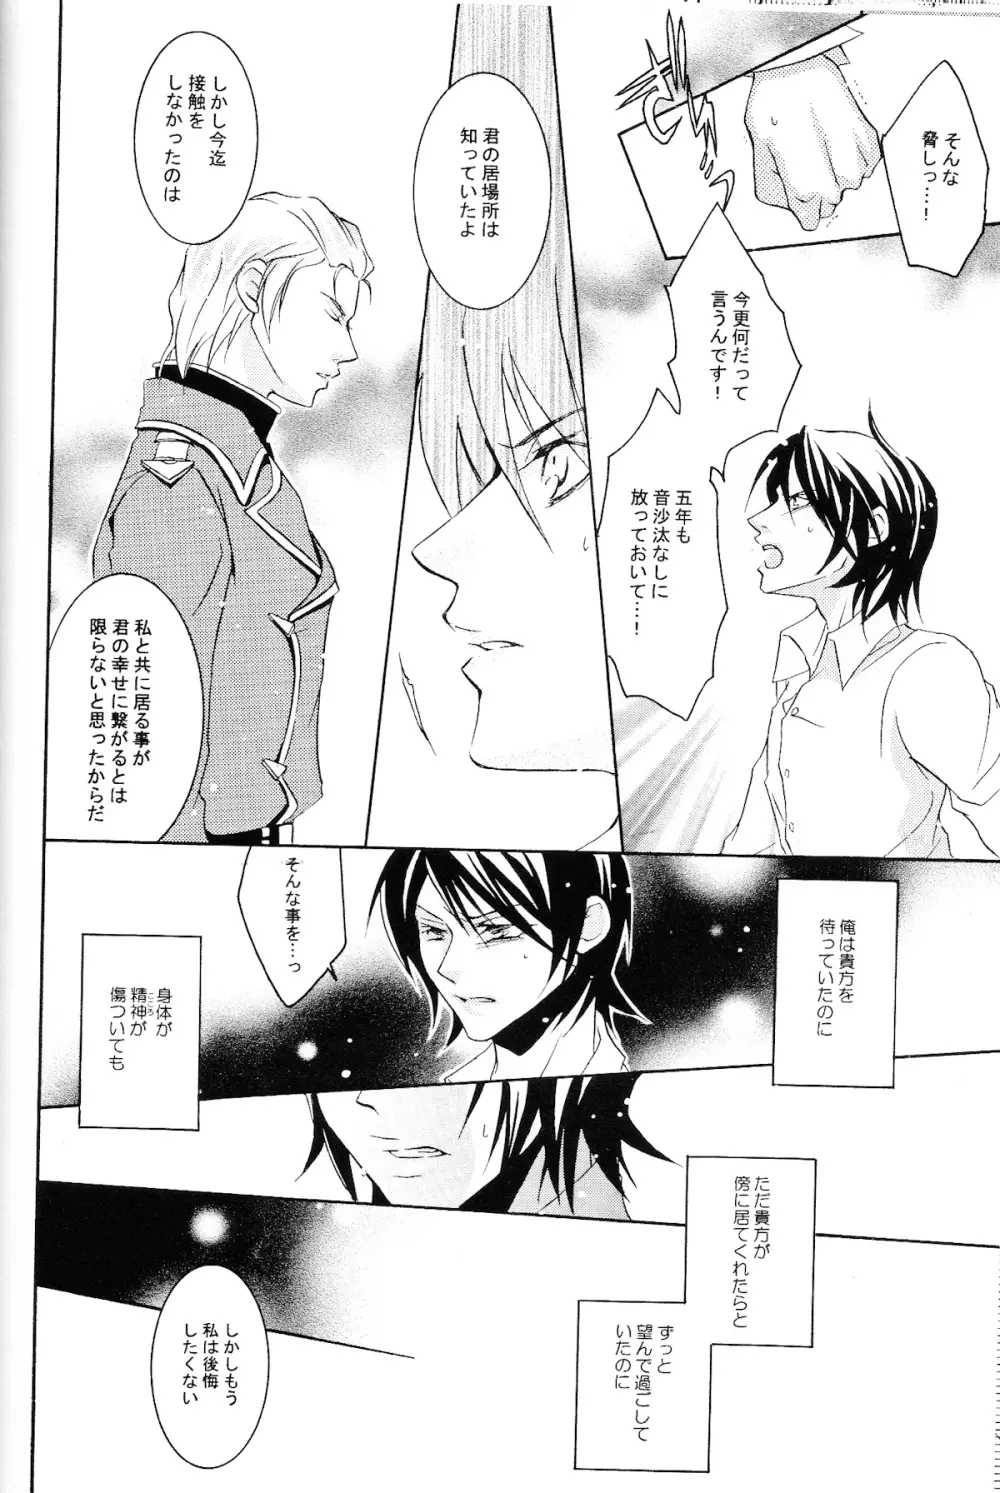 REPLAY 108 再録本 - page68